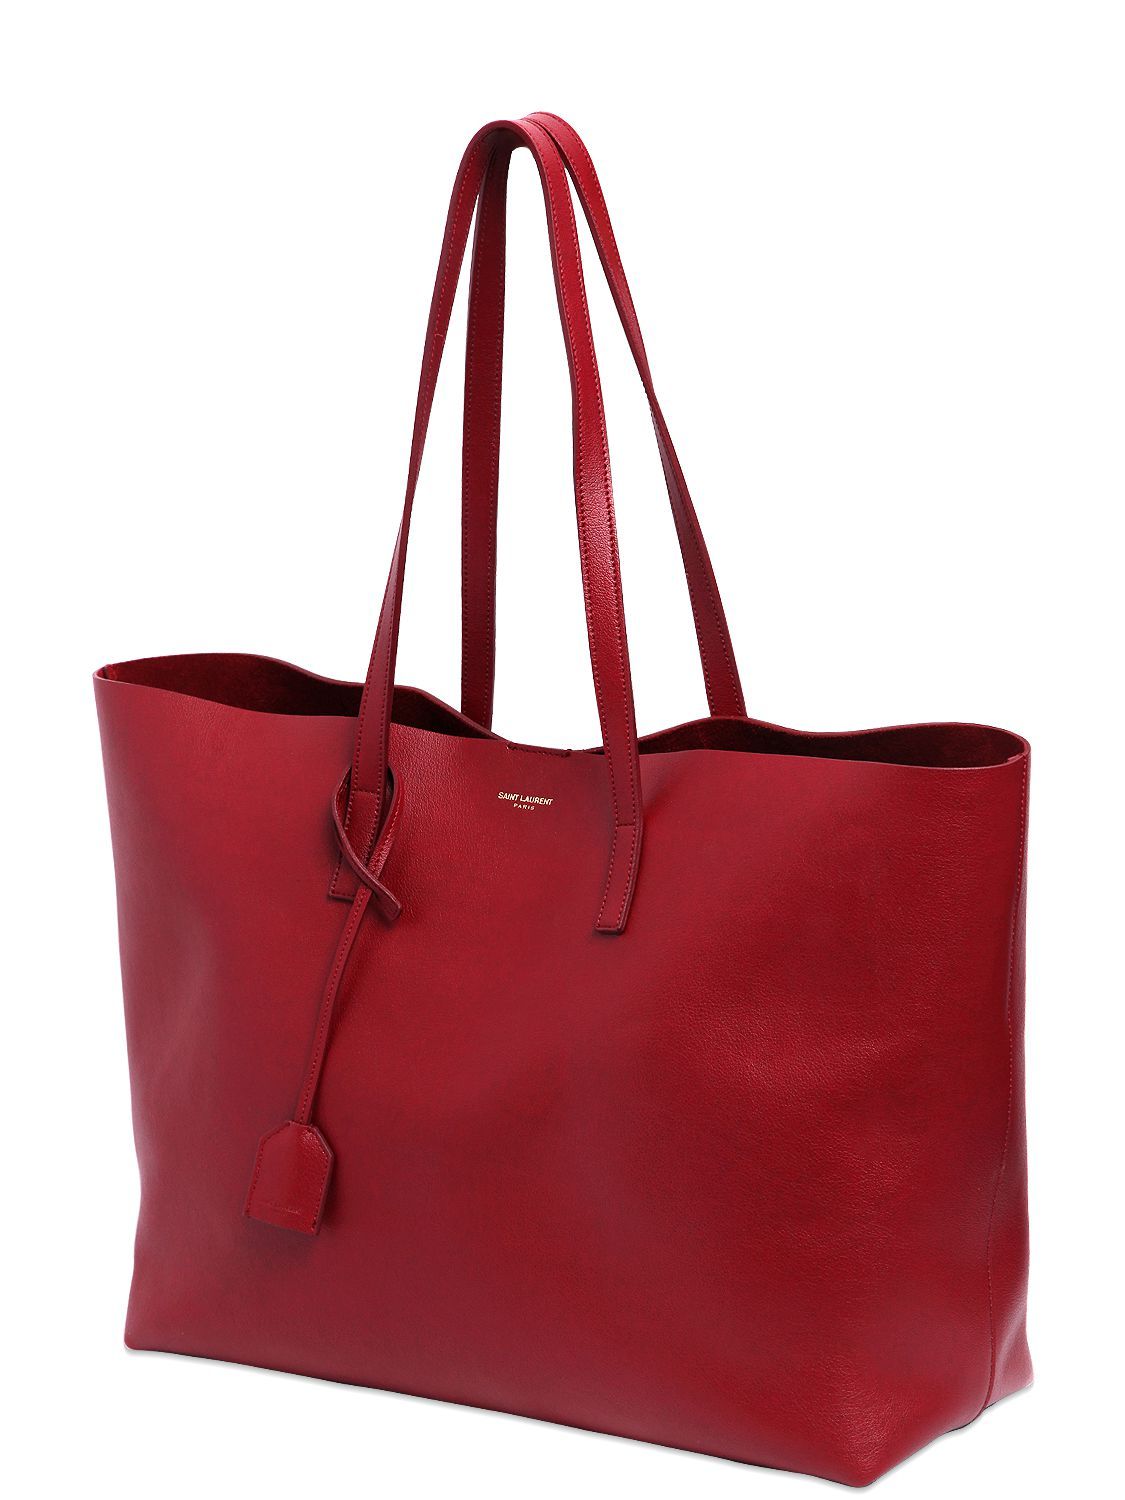 Lyst - Saint Laurent Soft Leather Tote Bag in Red